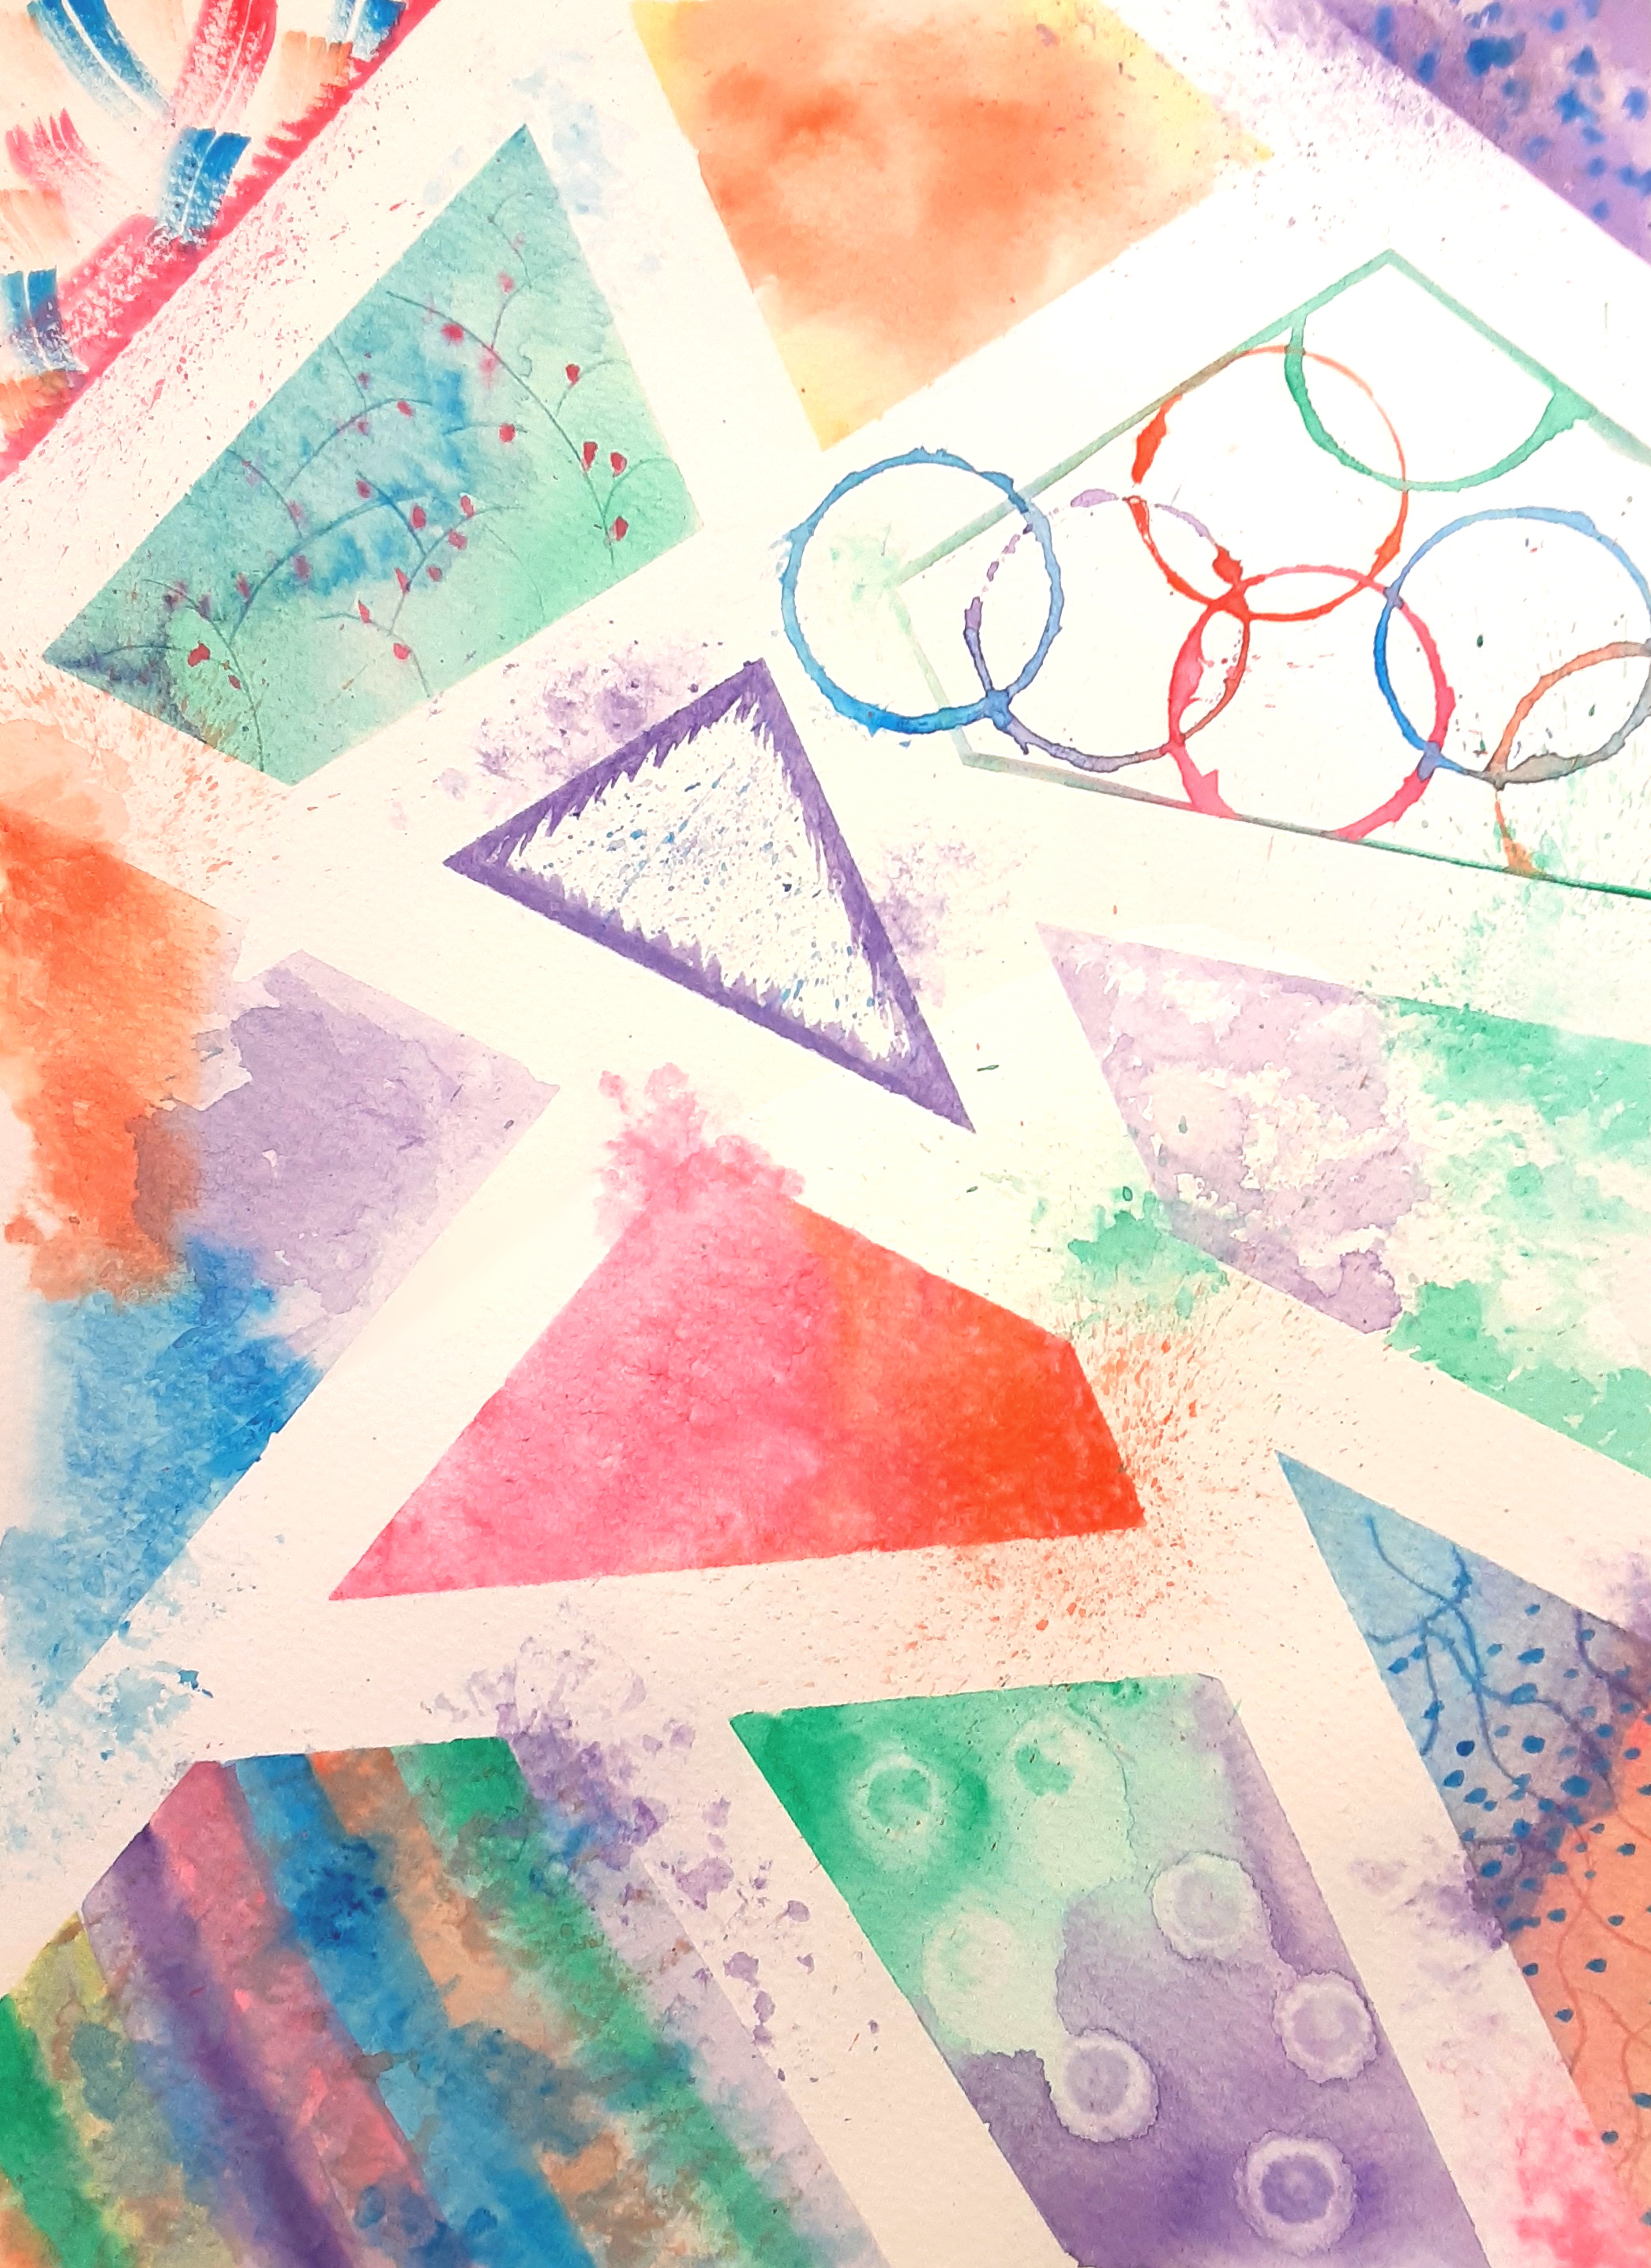 An abstract painting made with watercolors featuring geometric designs in a variety of colors.